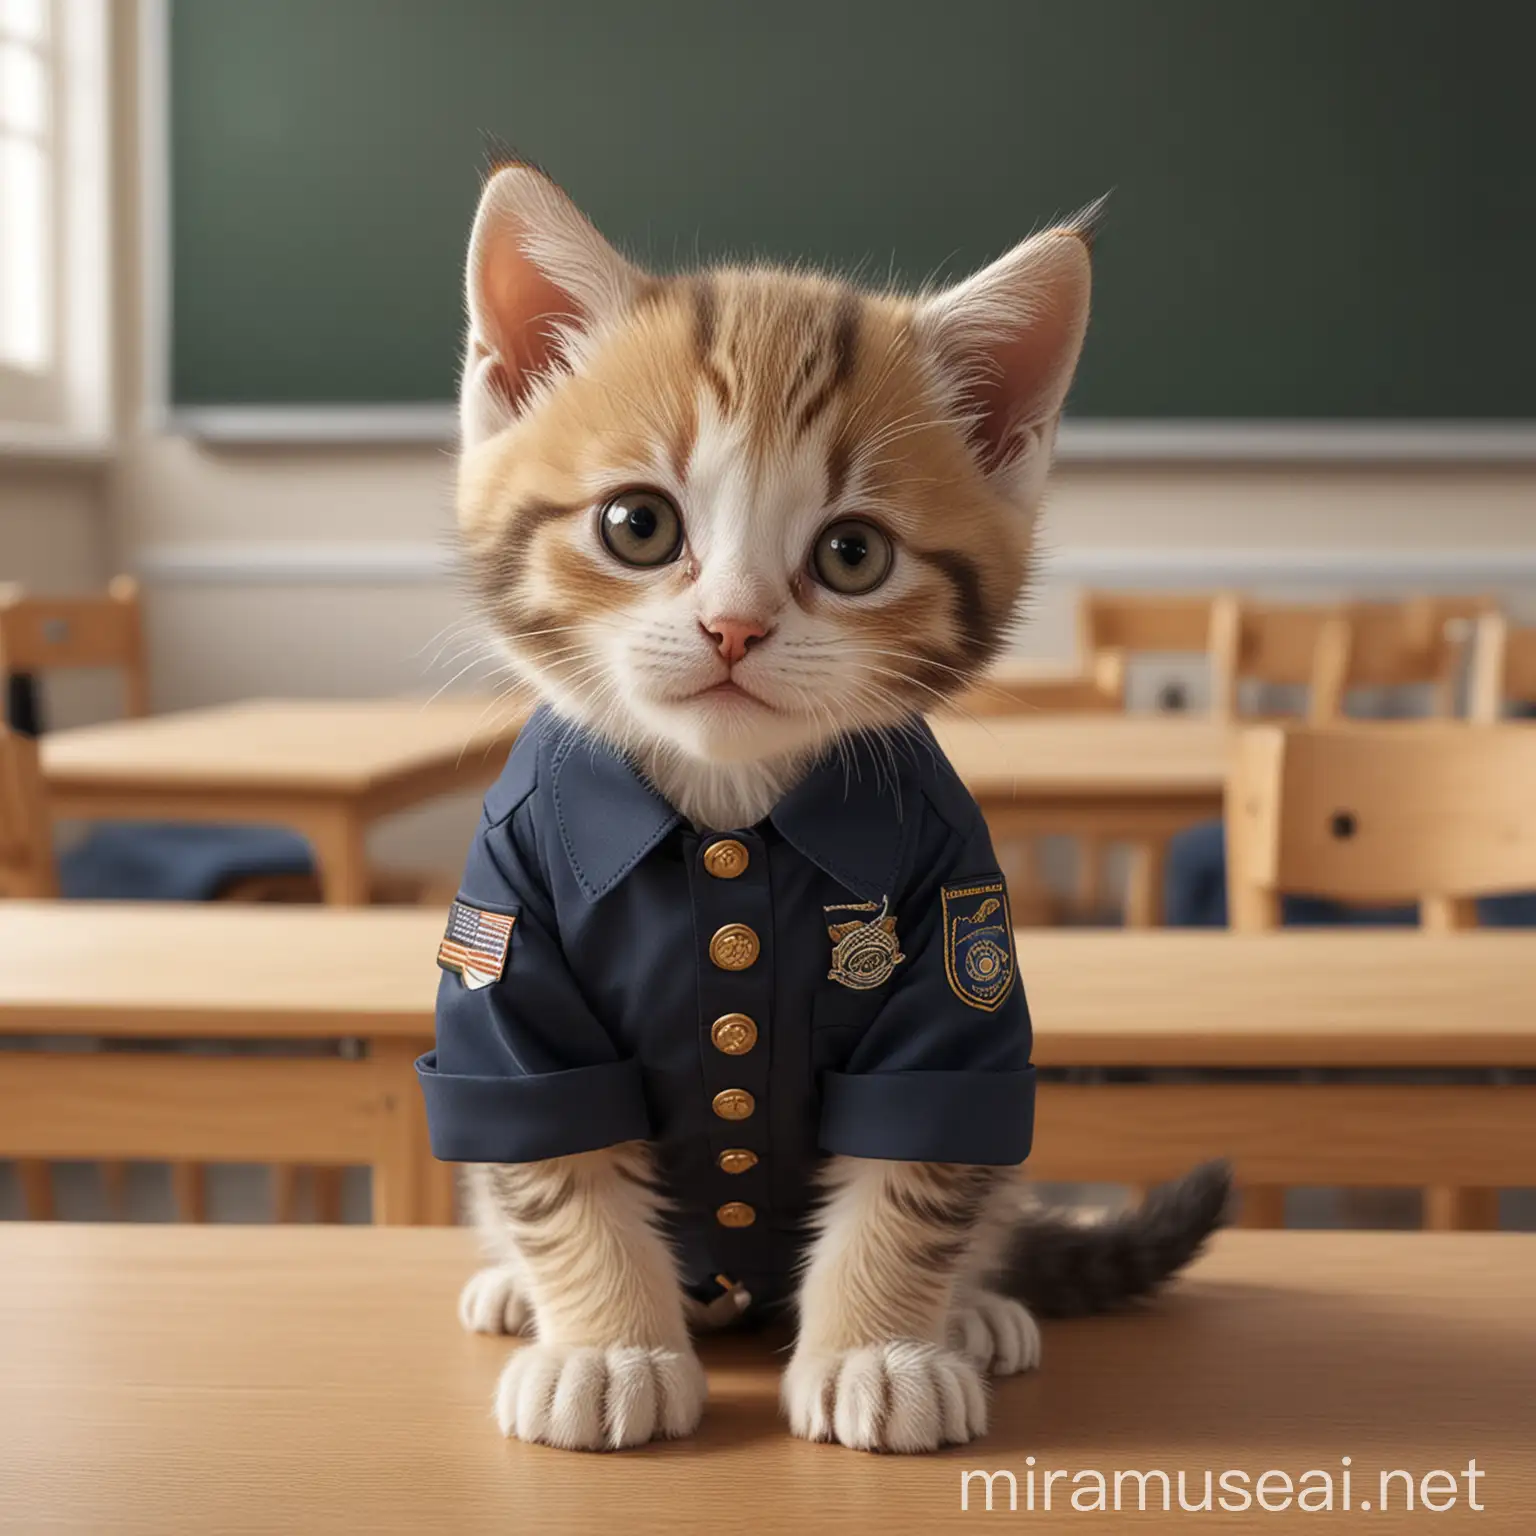 realistic image of a kitten in a classroom dressed in uniform listening attentively to lessons